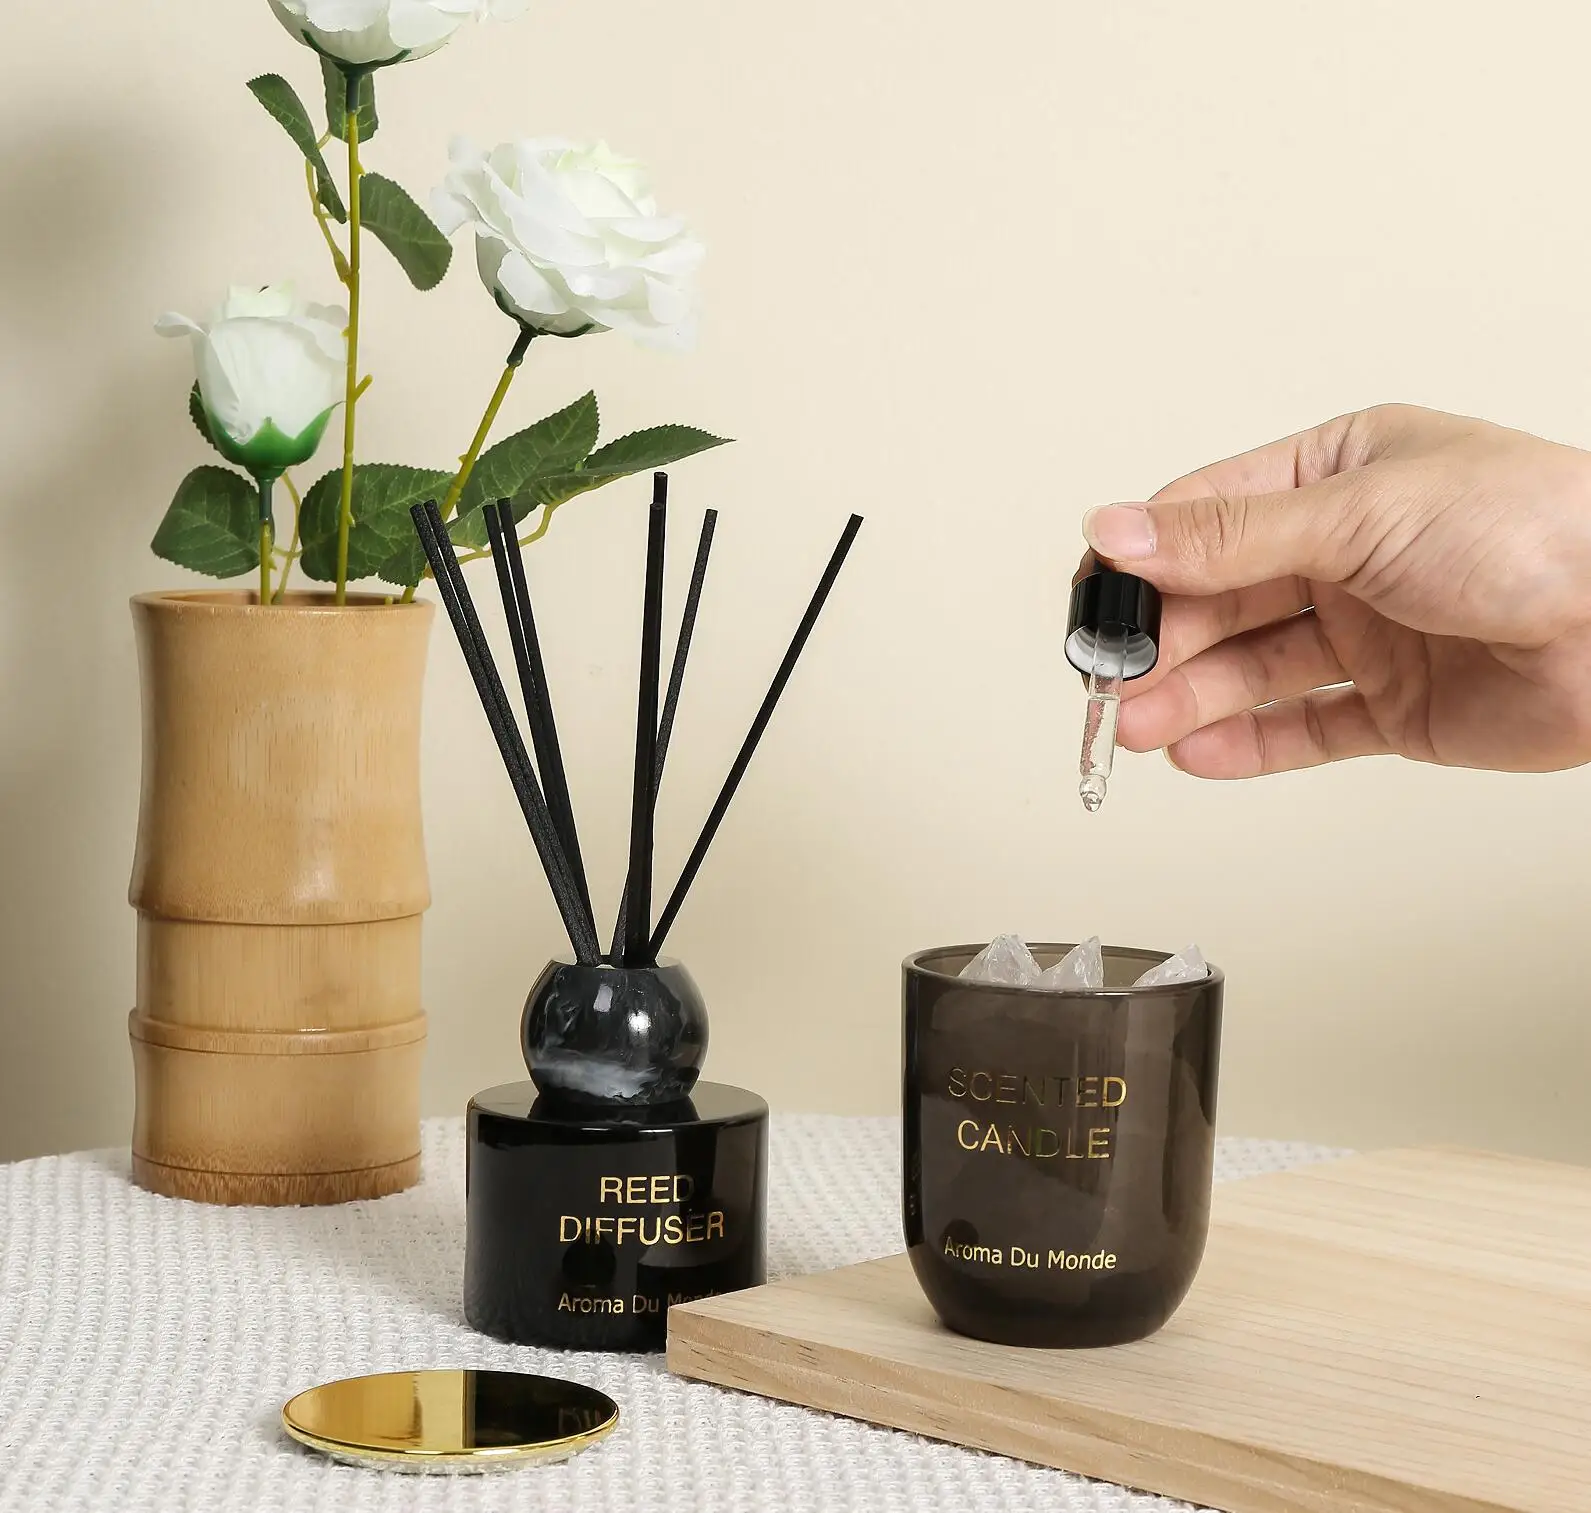 New design  homemulti-scented 150ml diffuser air freshener Reed Diffuser With Rattan Sticks and aroma stones gift sets